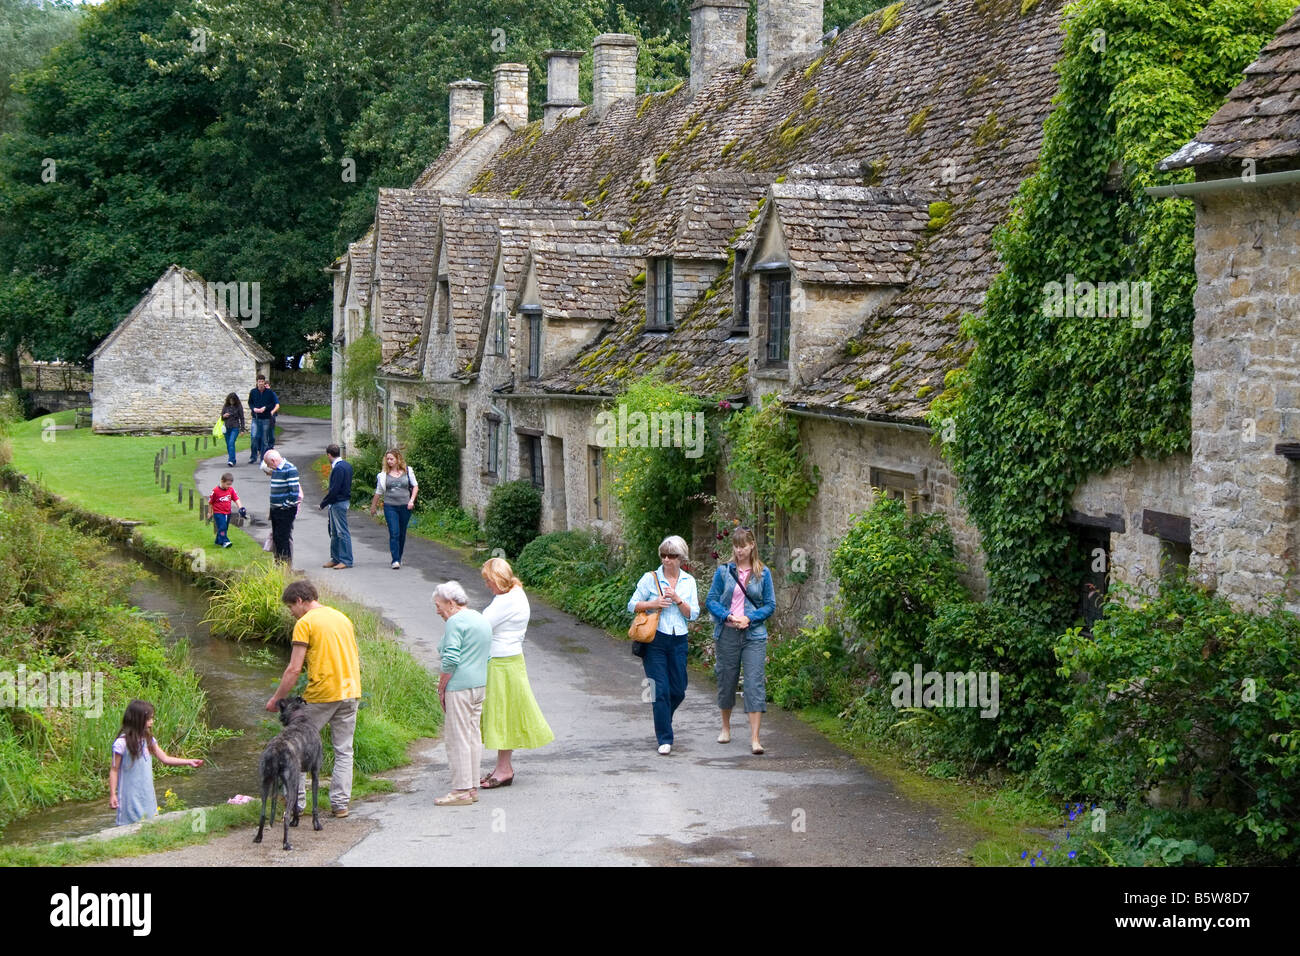 Cotswold stone cottages in the village of Bibury Gloucestershire England Stock Photo